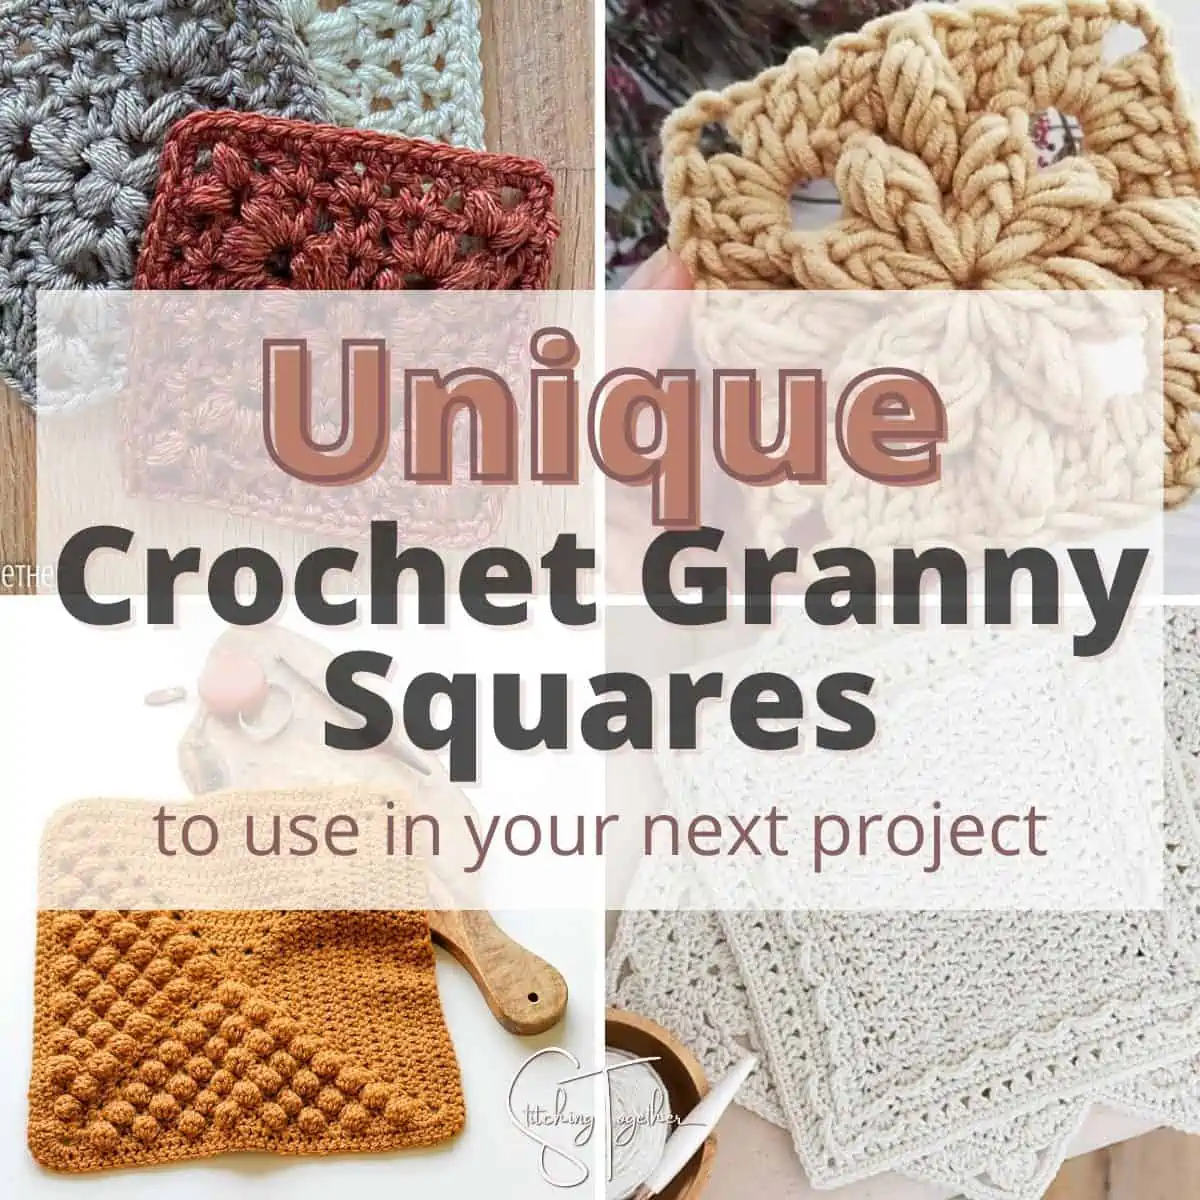 https://www.stitching-together.com/wp-content/uploads/2022/04/free-crochet-granny-square-patterns.webp